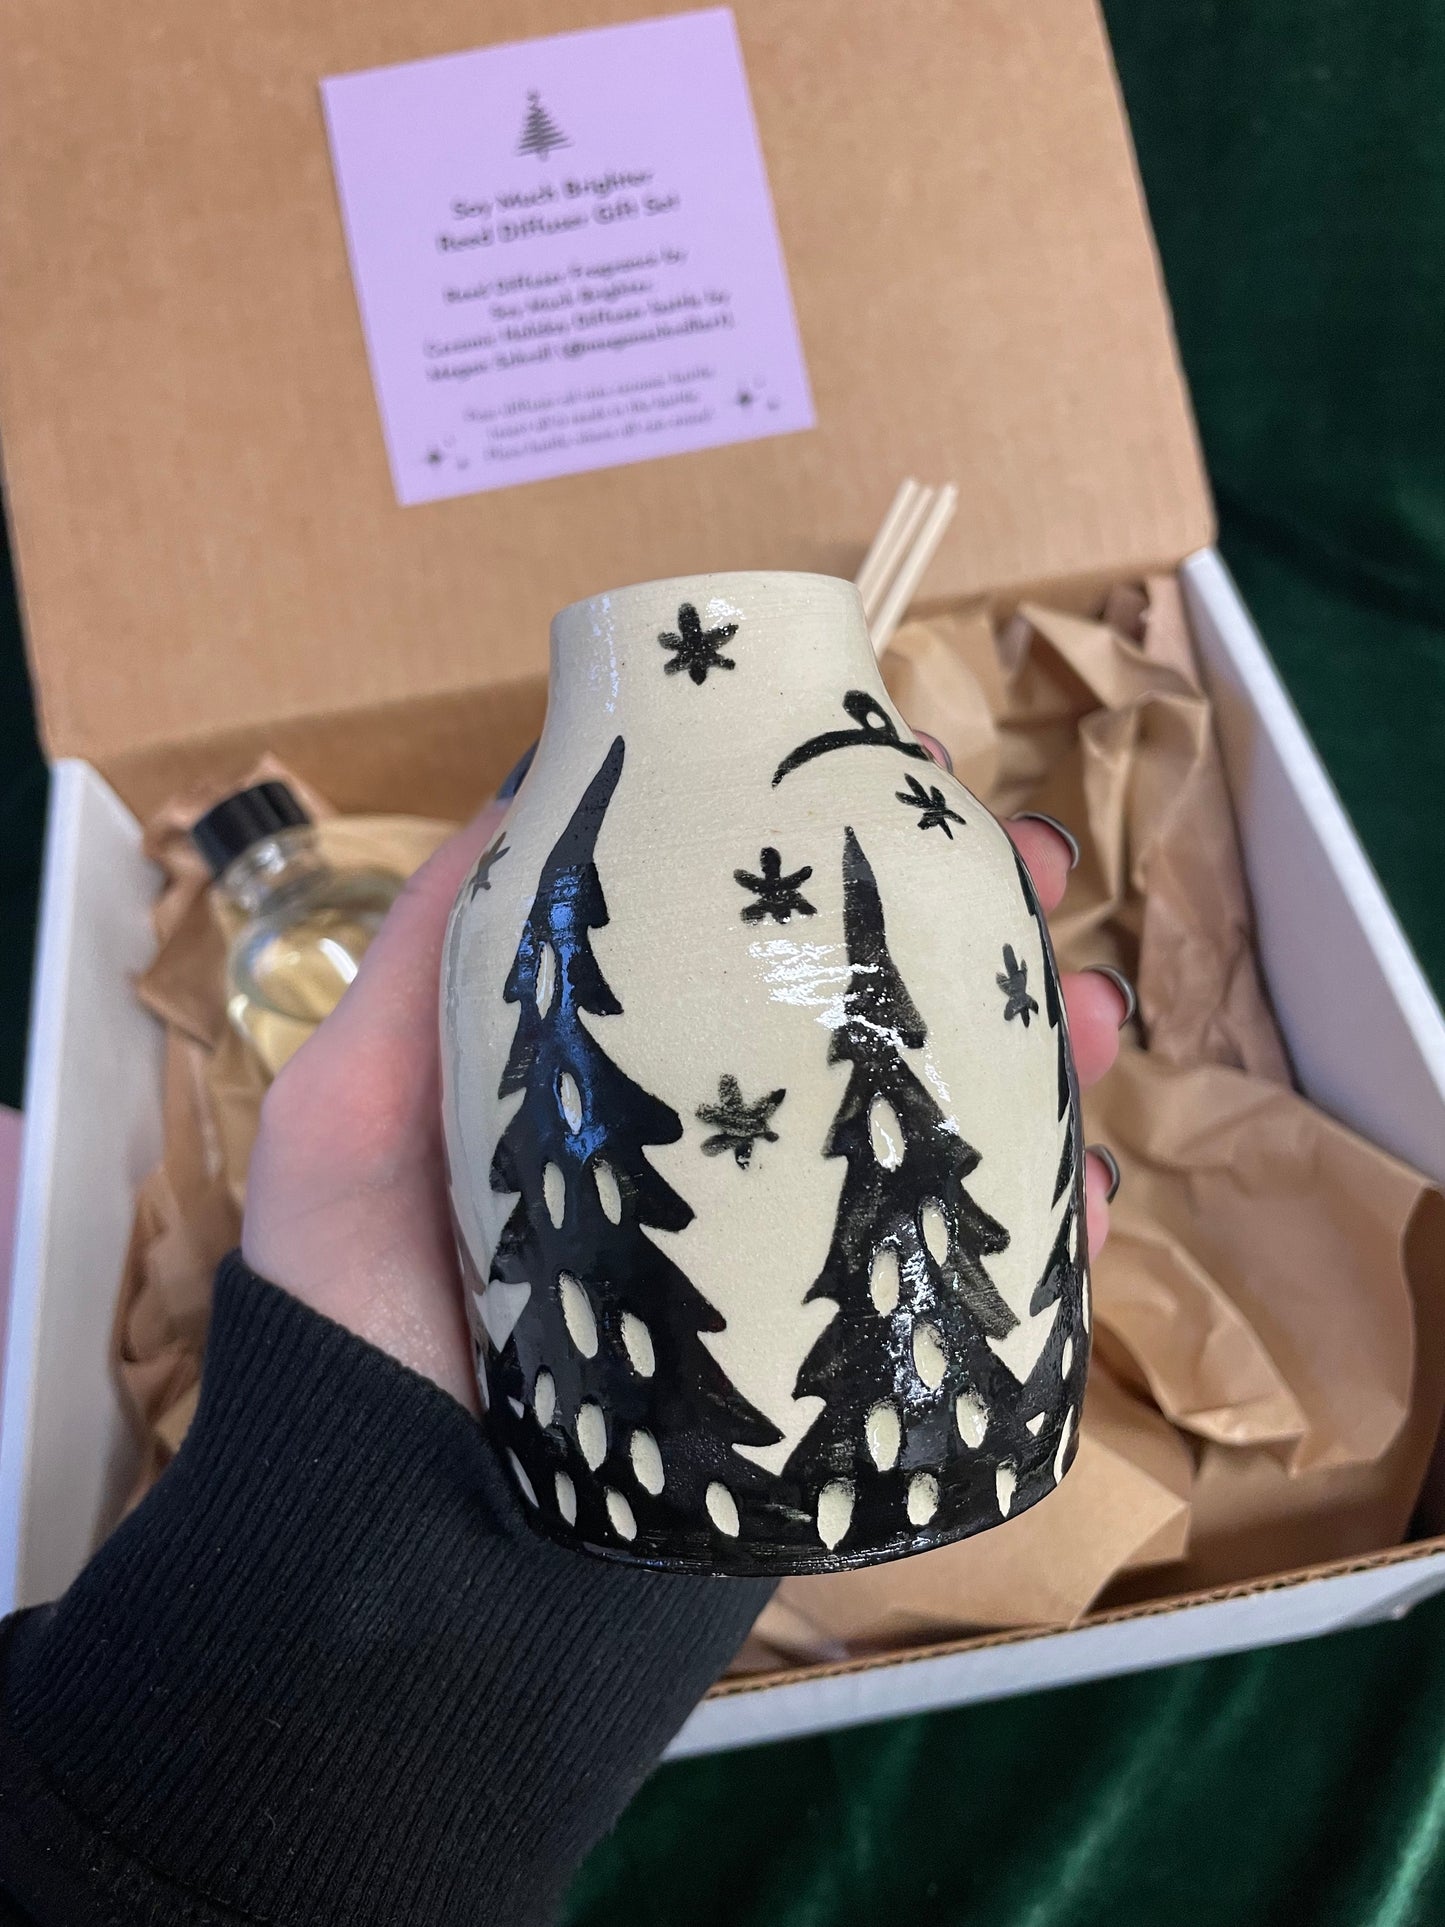 Woodsy Reed Diffuser Gift Box